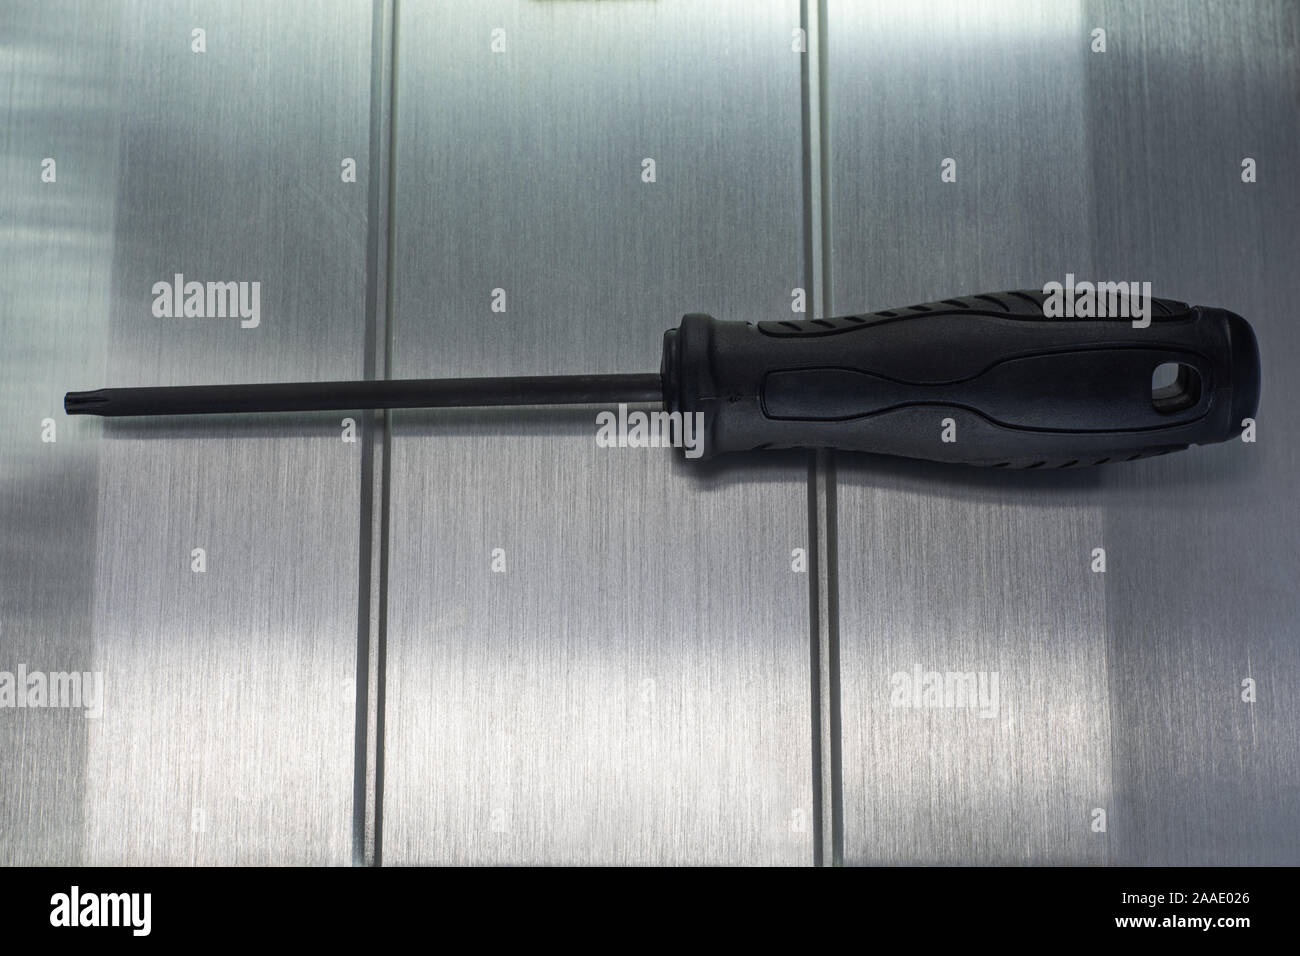 Professional reinforced black matt screw driver placed on a polished aluminum surface. View from the top. Stock Photo